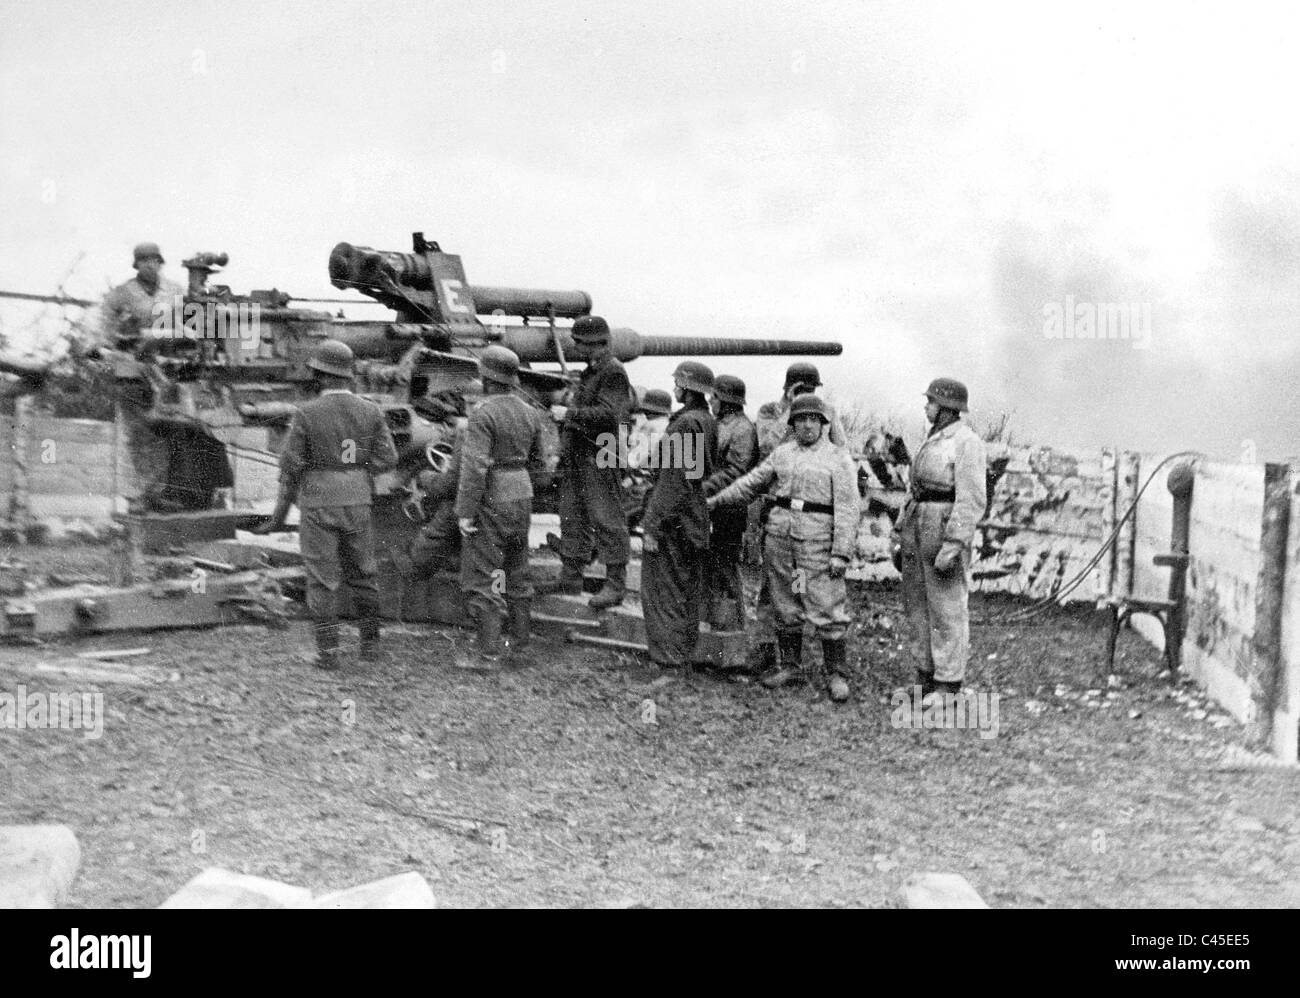 German 10.5 cm Flak 38 while fighting on the Oder Stock Photo